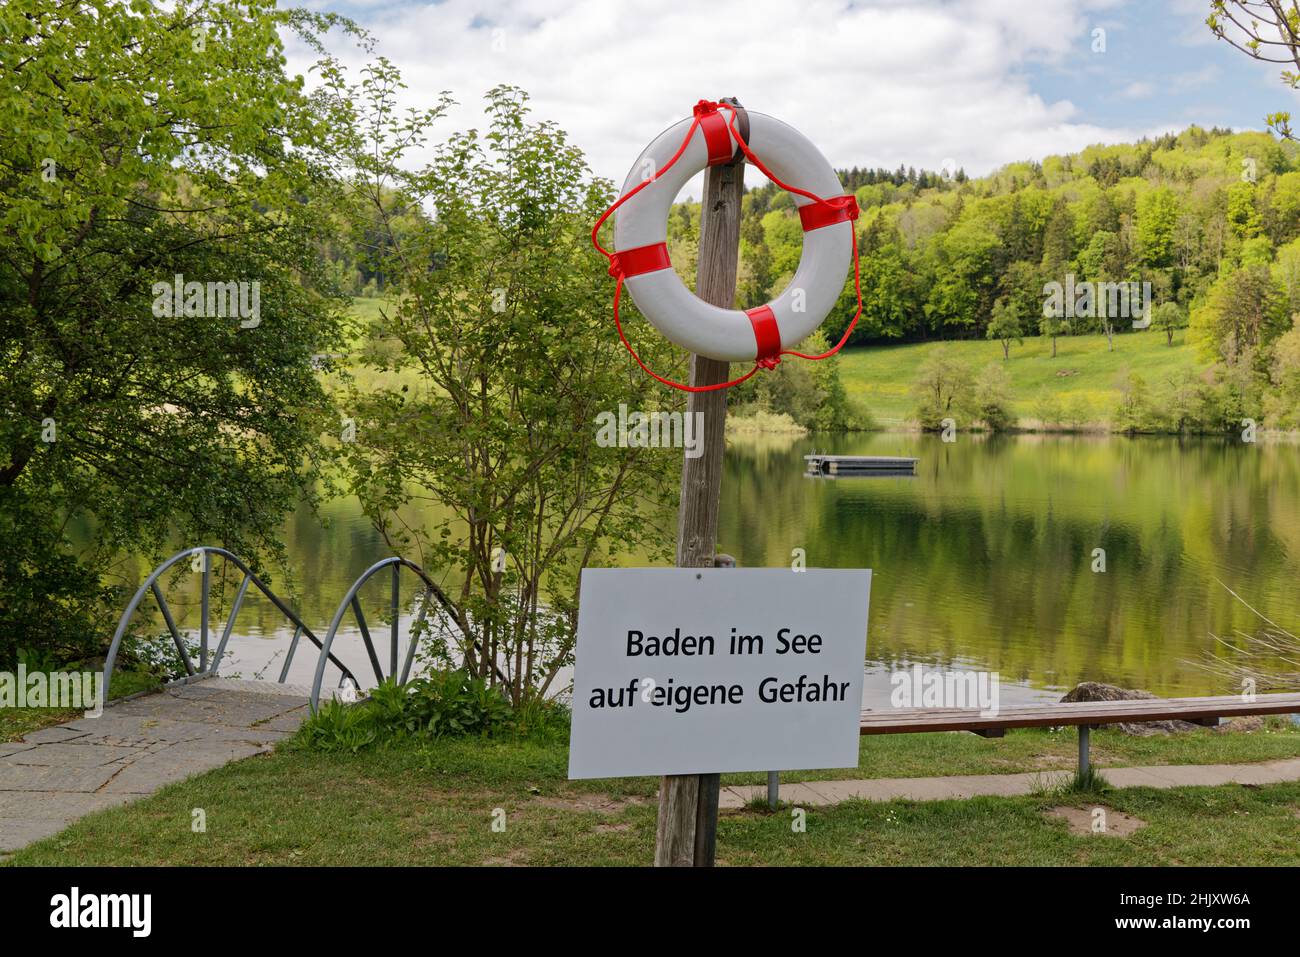 bathing establishment with lake, in the foreground white-red rescue ring with warning sign german text translation: swim in the lake at your own risk Stock Photo